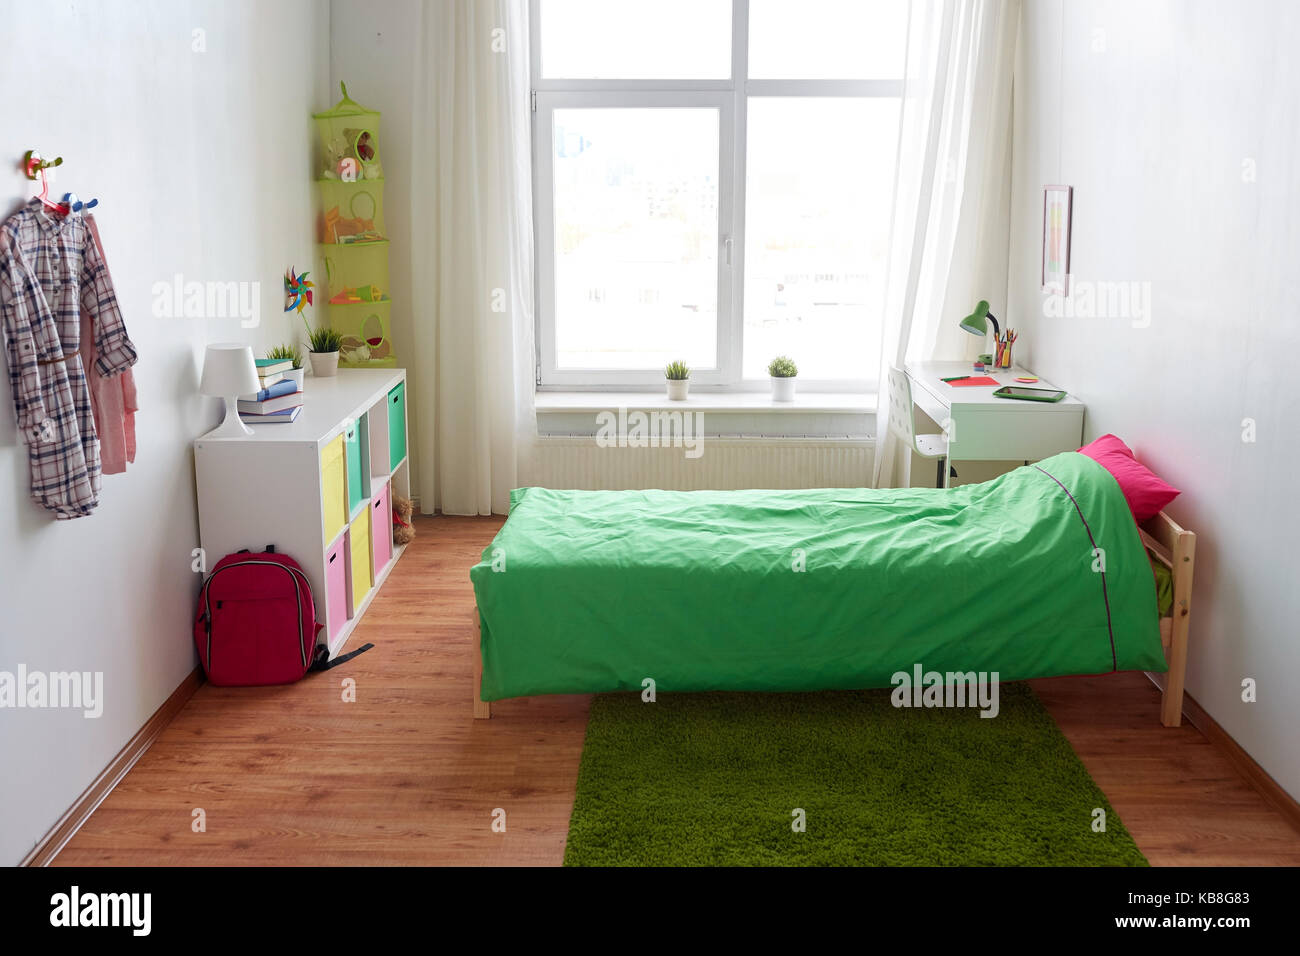 kids room interior with bed, table and accessories Stock Photo